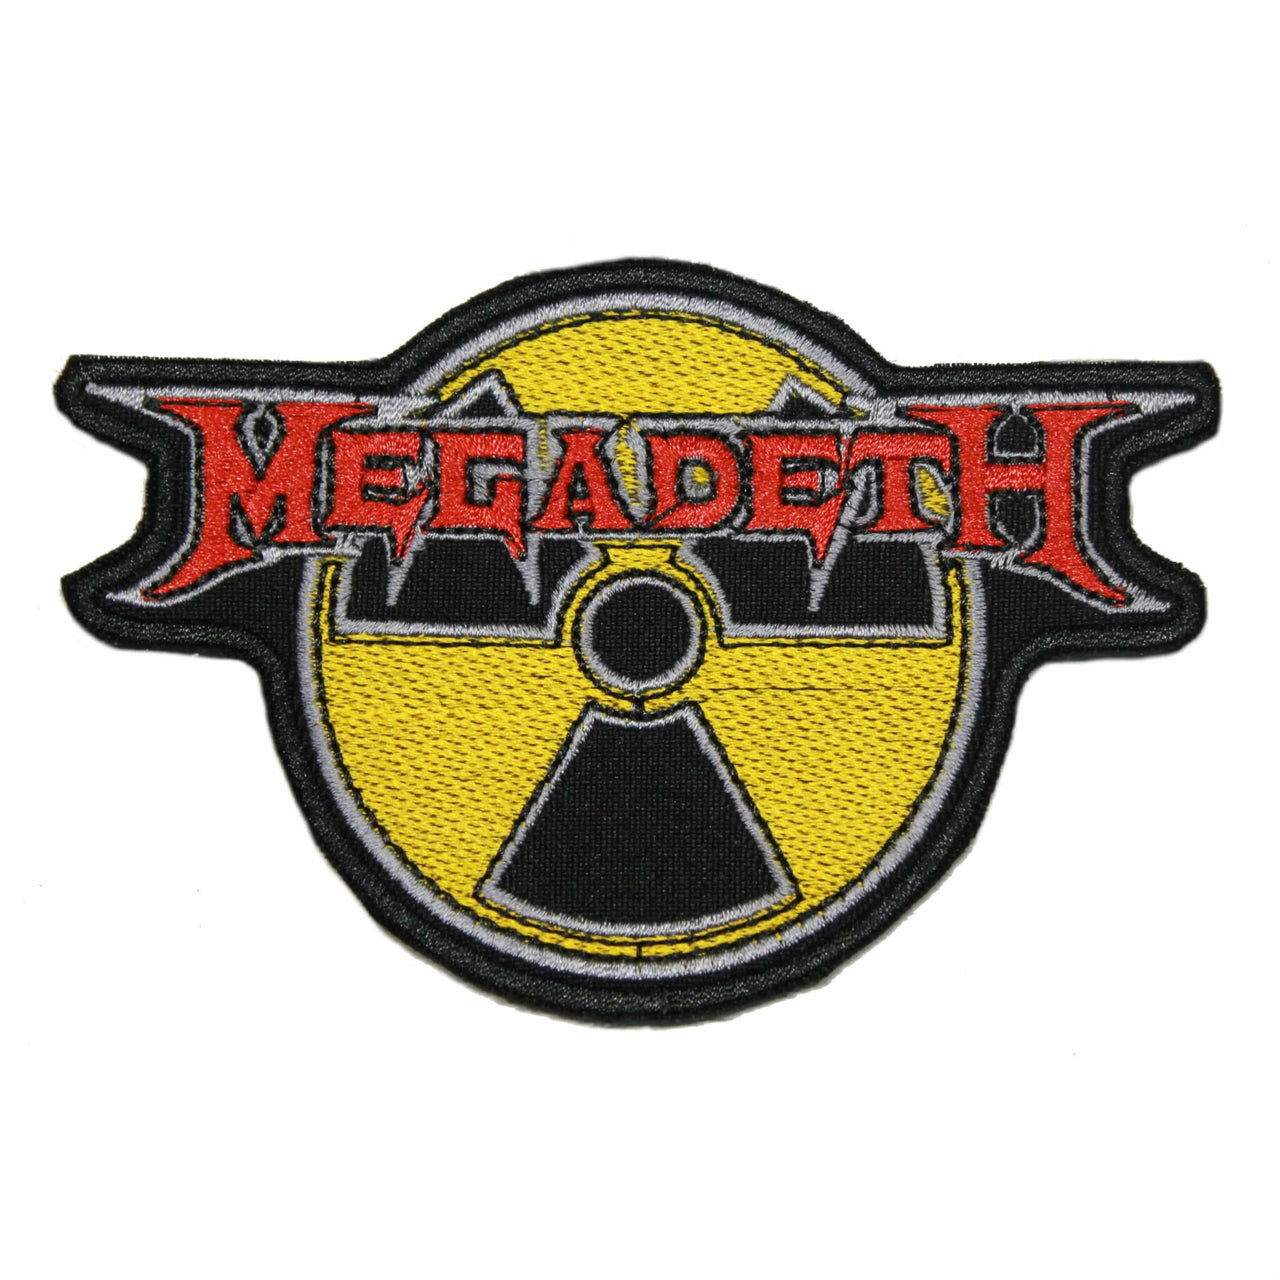 Megadeth Radioactive Nuclear Patch